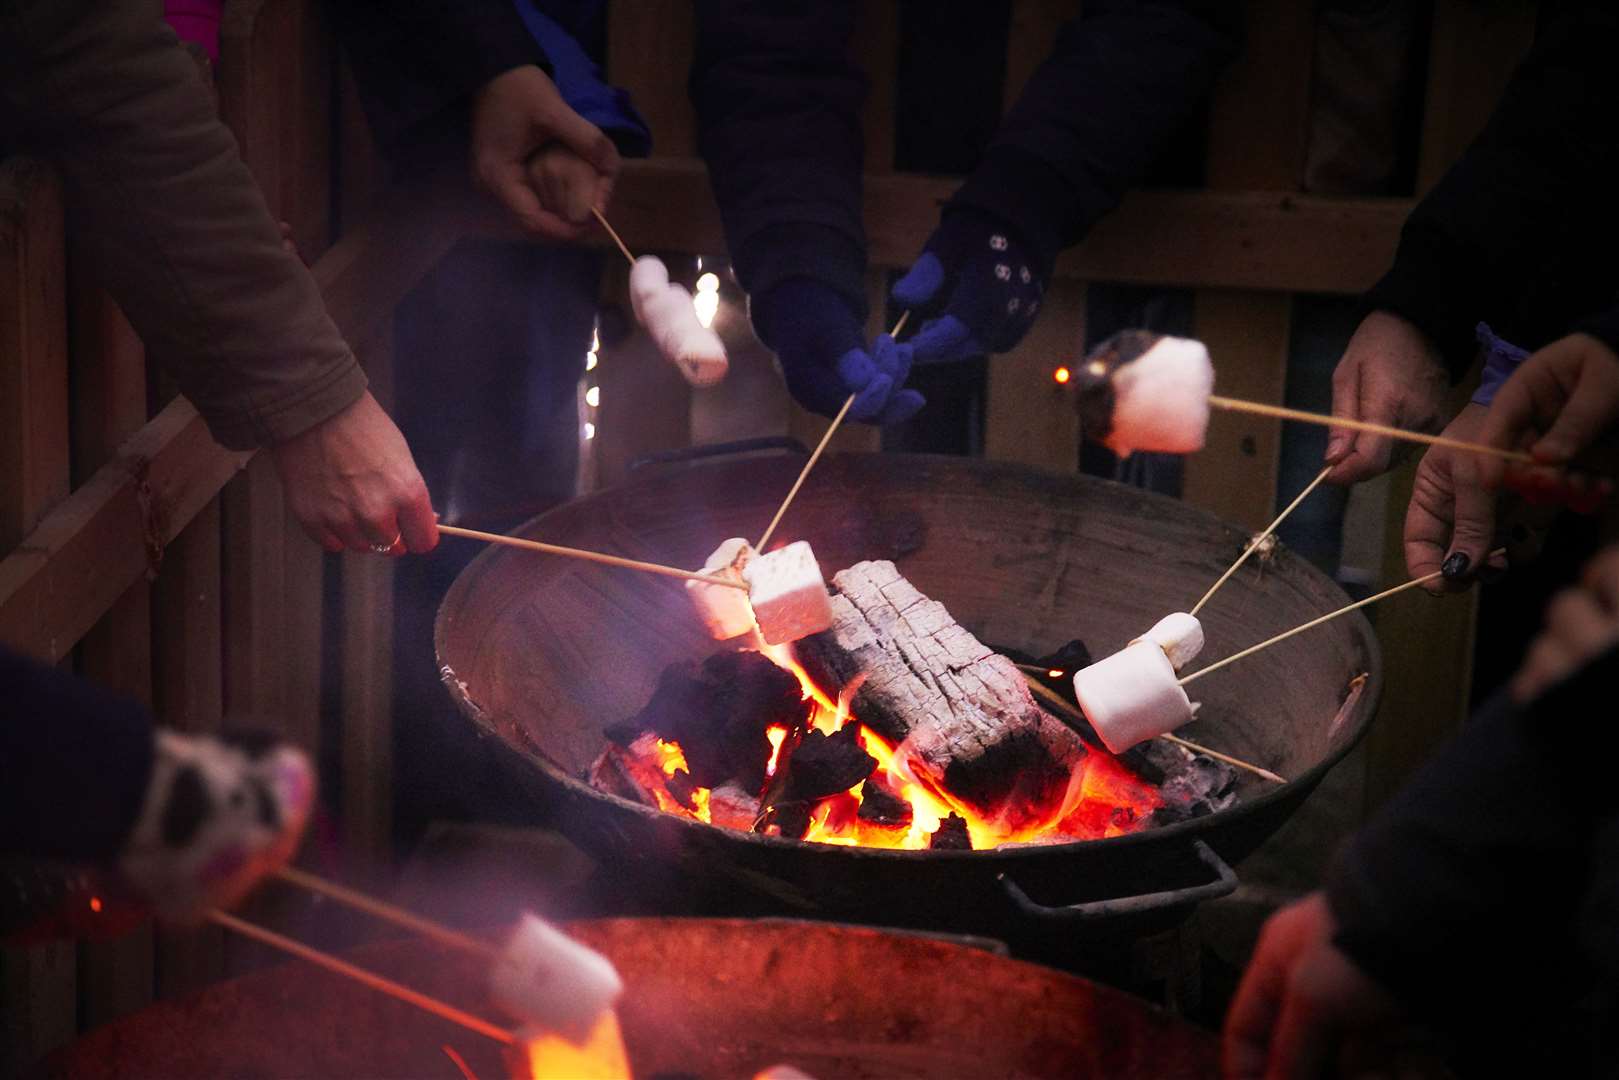 Visitors can toast marshmallows over a fire pit